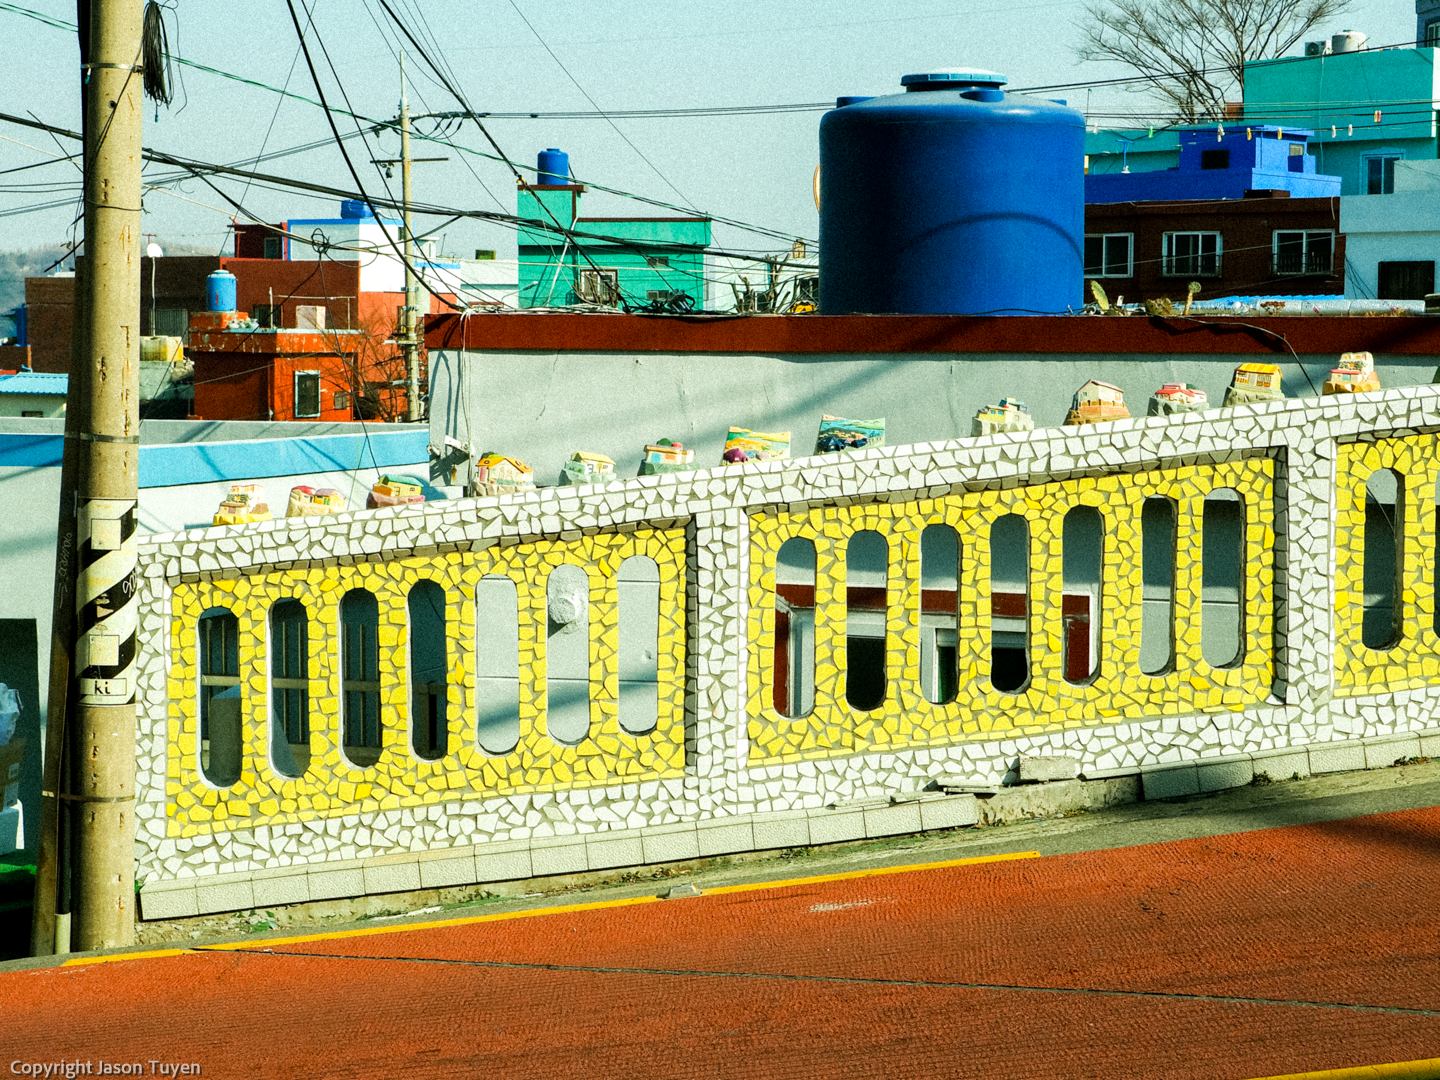 Tiny toy houses sit atop a highway divider near Busan's Gamcheon Village